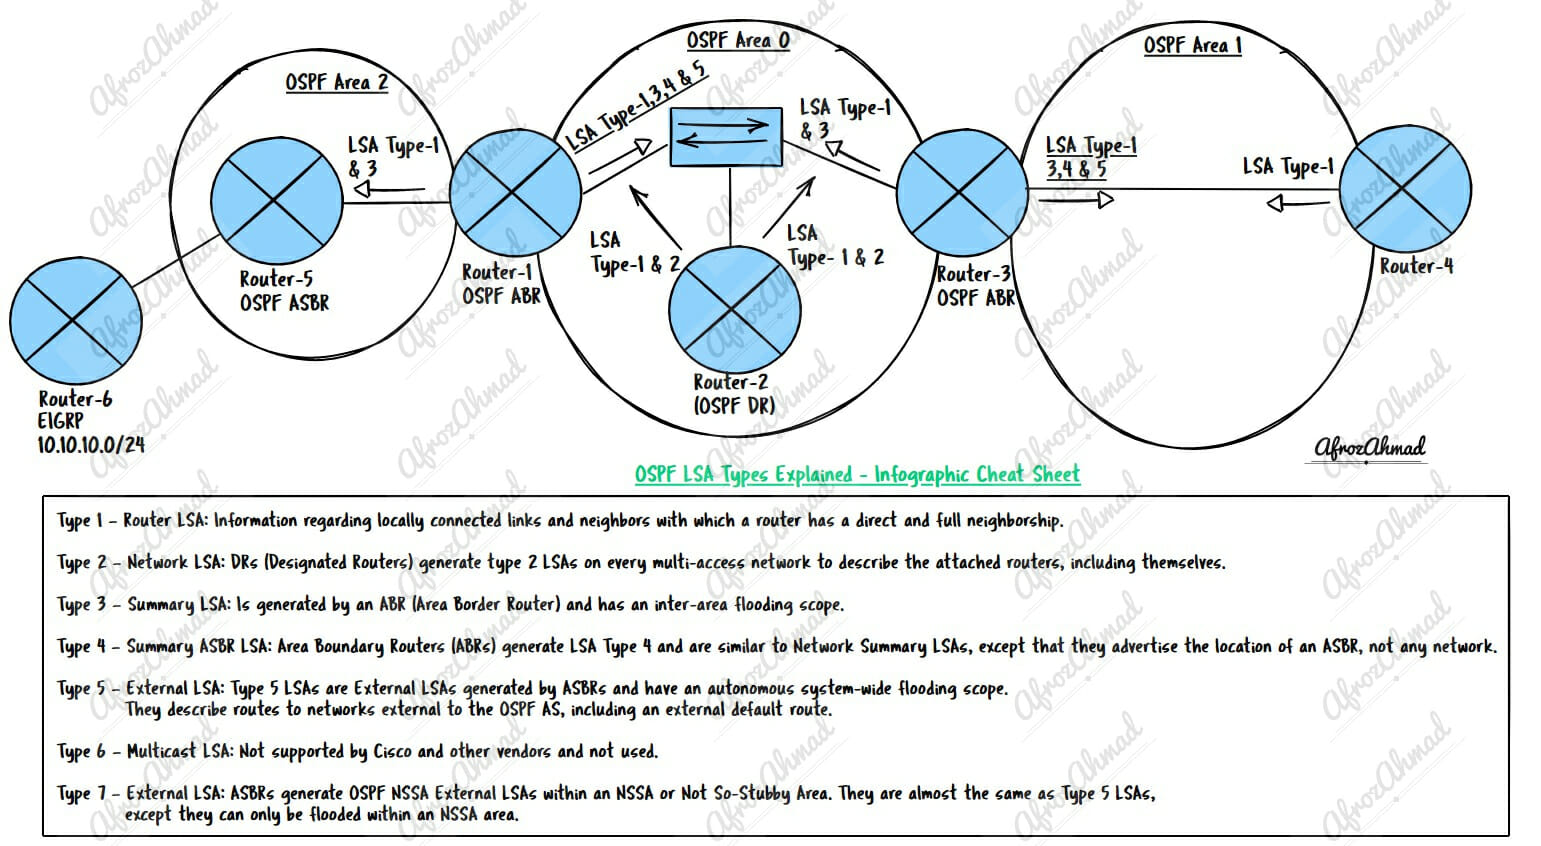 OSPF LSA Types Explained with Infographic Cheat Sheet